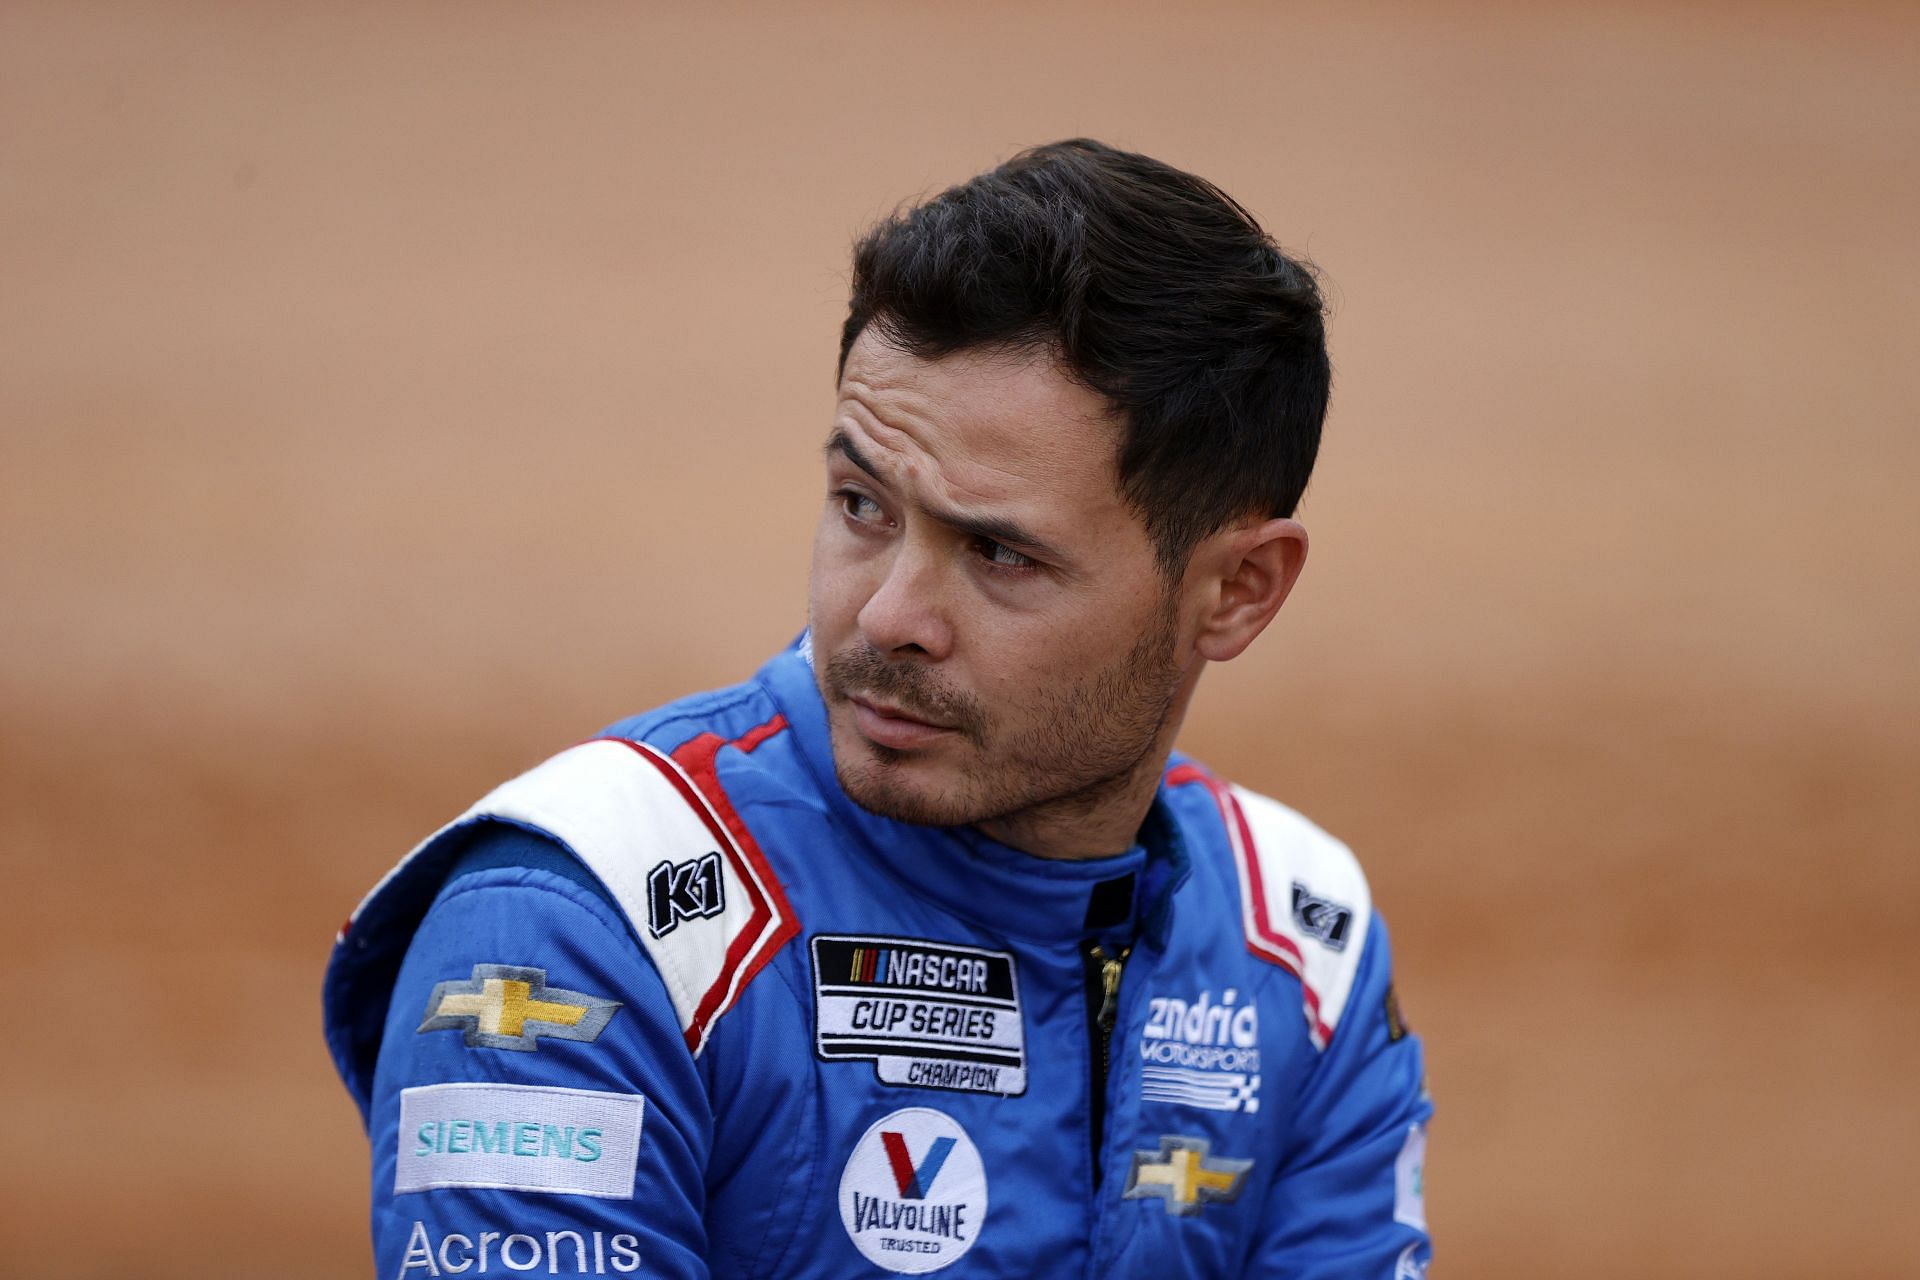 Kyle Larson before the 2022 NASCAR Cup Series Food City Dirt Race at Bristol Motor Speedway in Tennessee. (Photo by Chris Graythen/Getty Images)